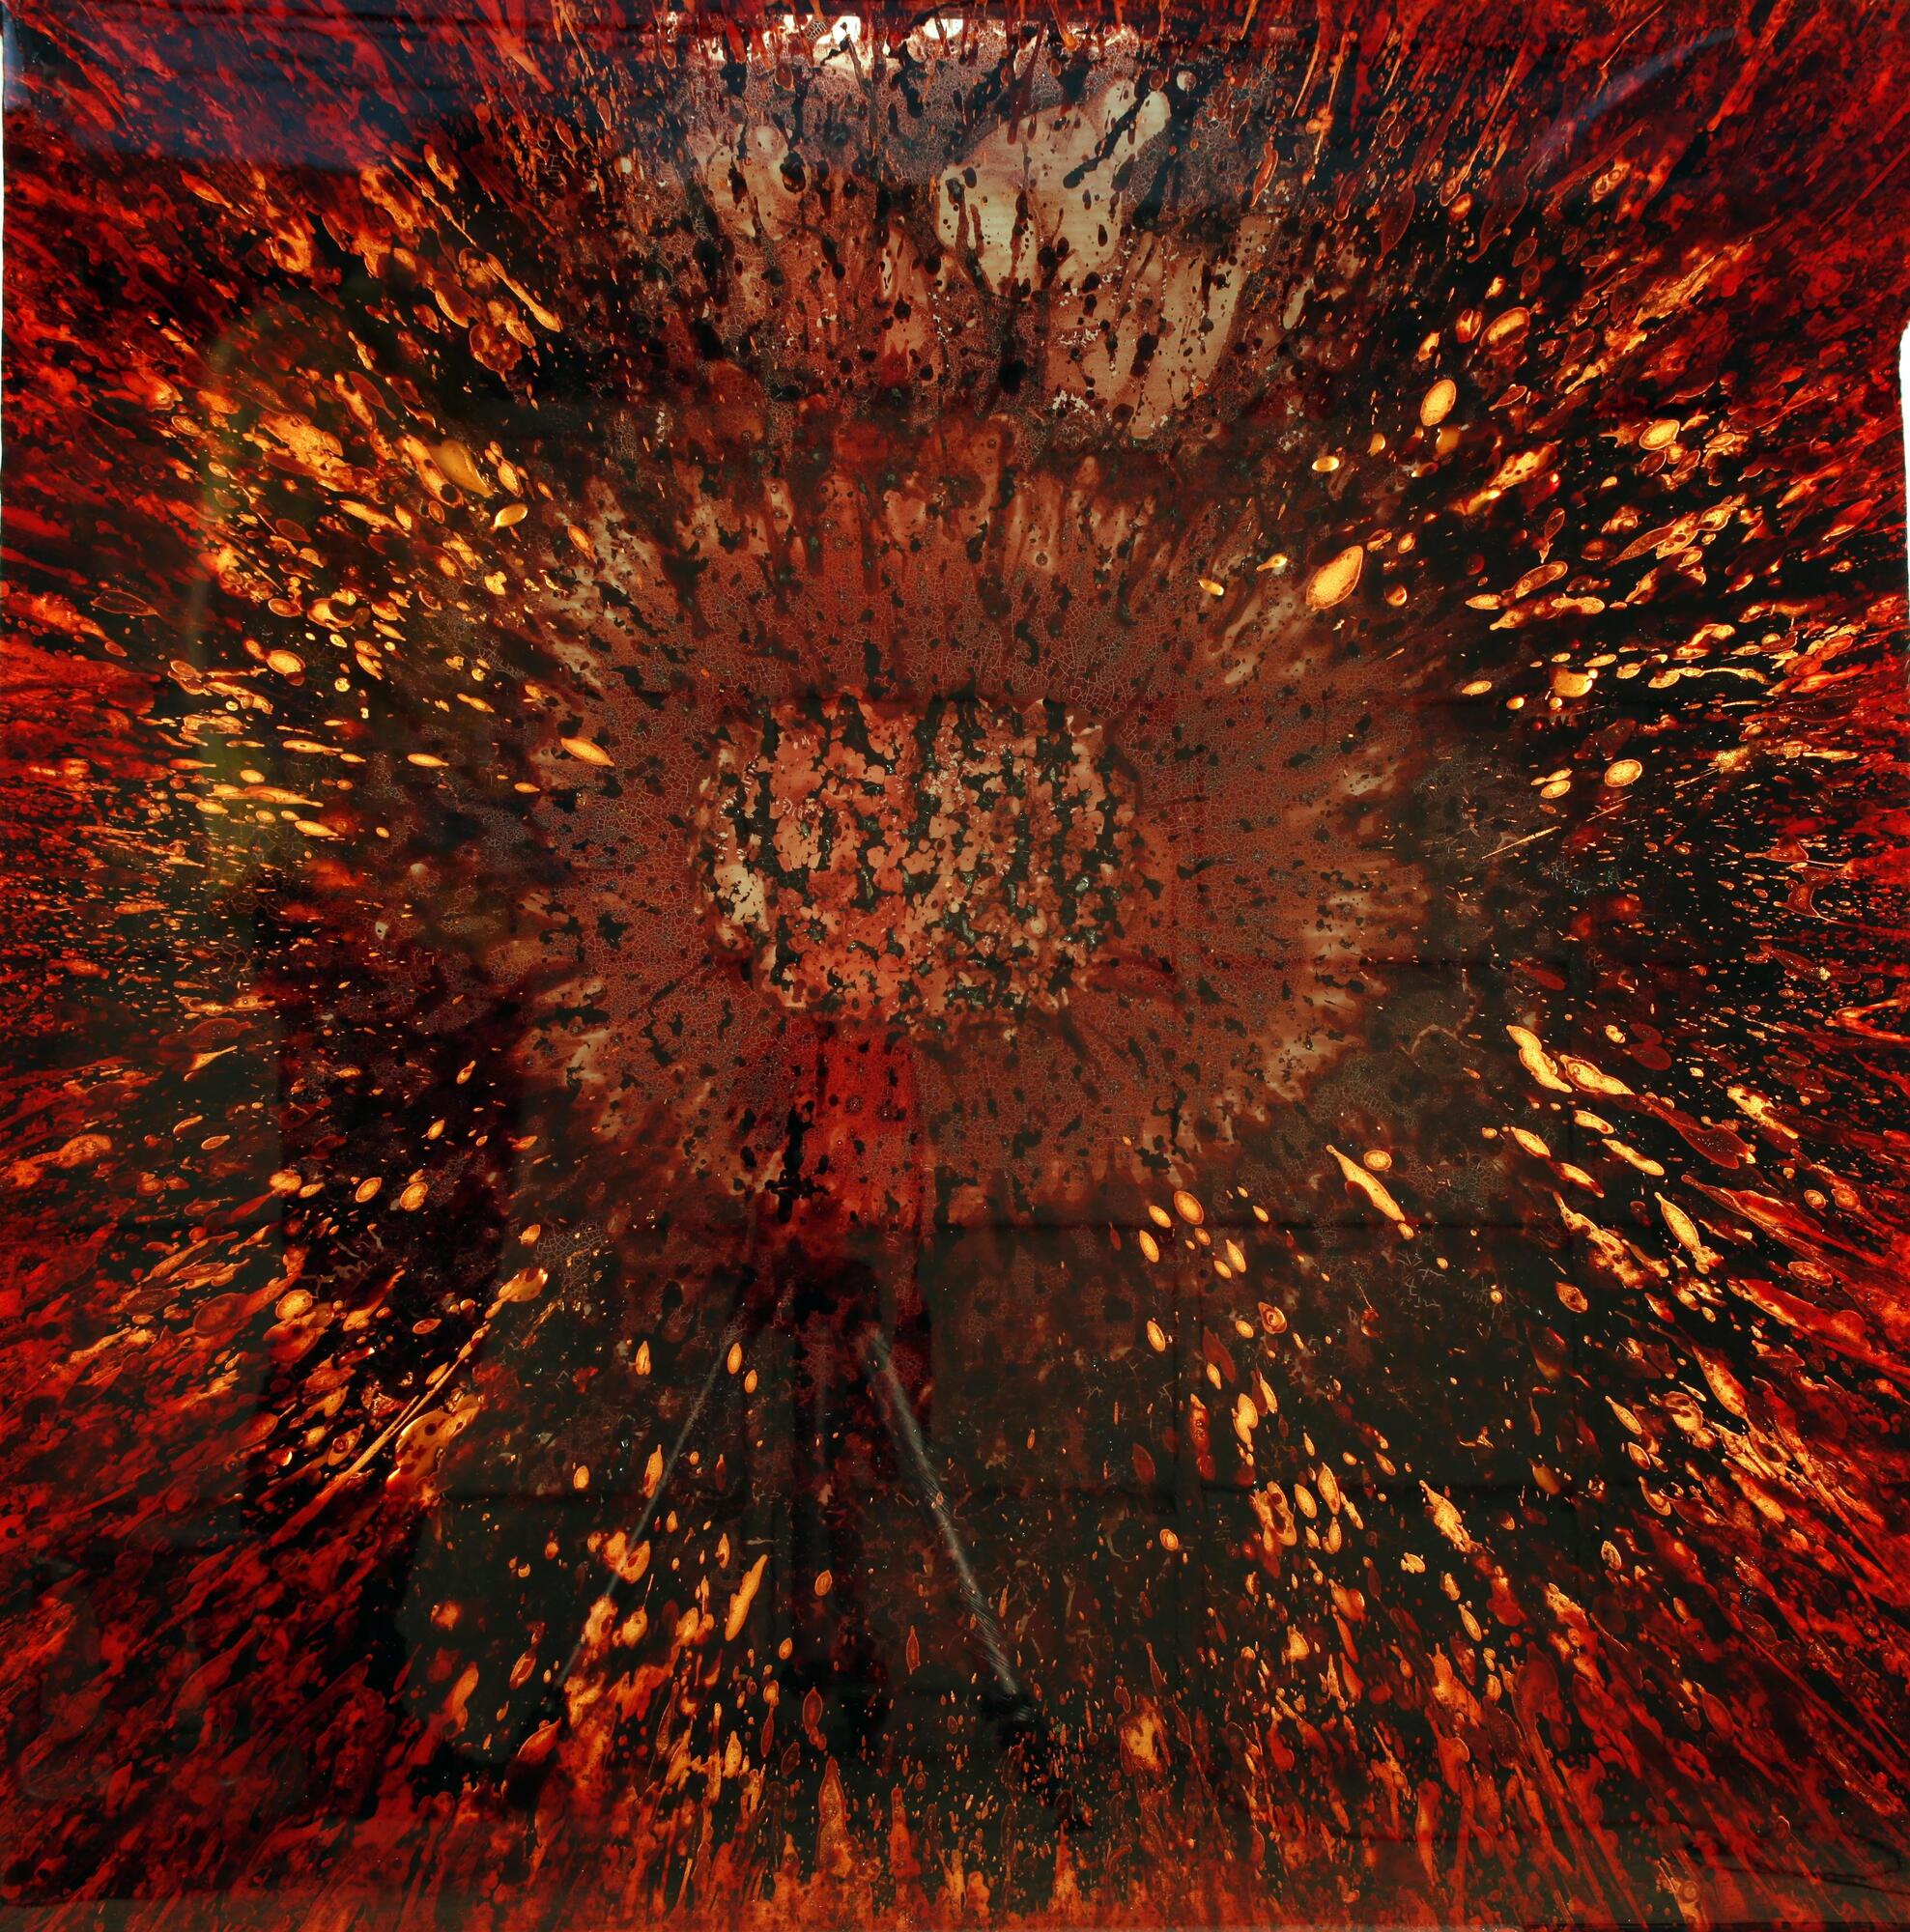 An abstract painting of blood in a sunburst pattern.